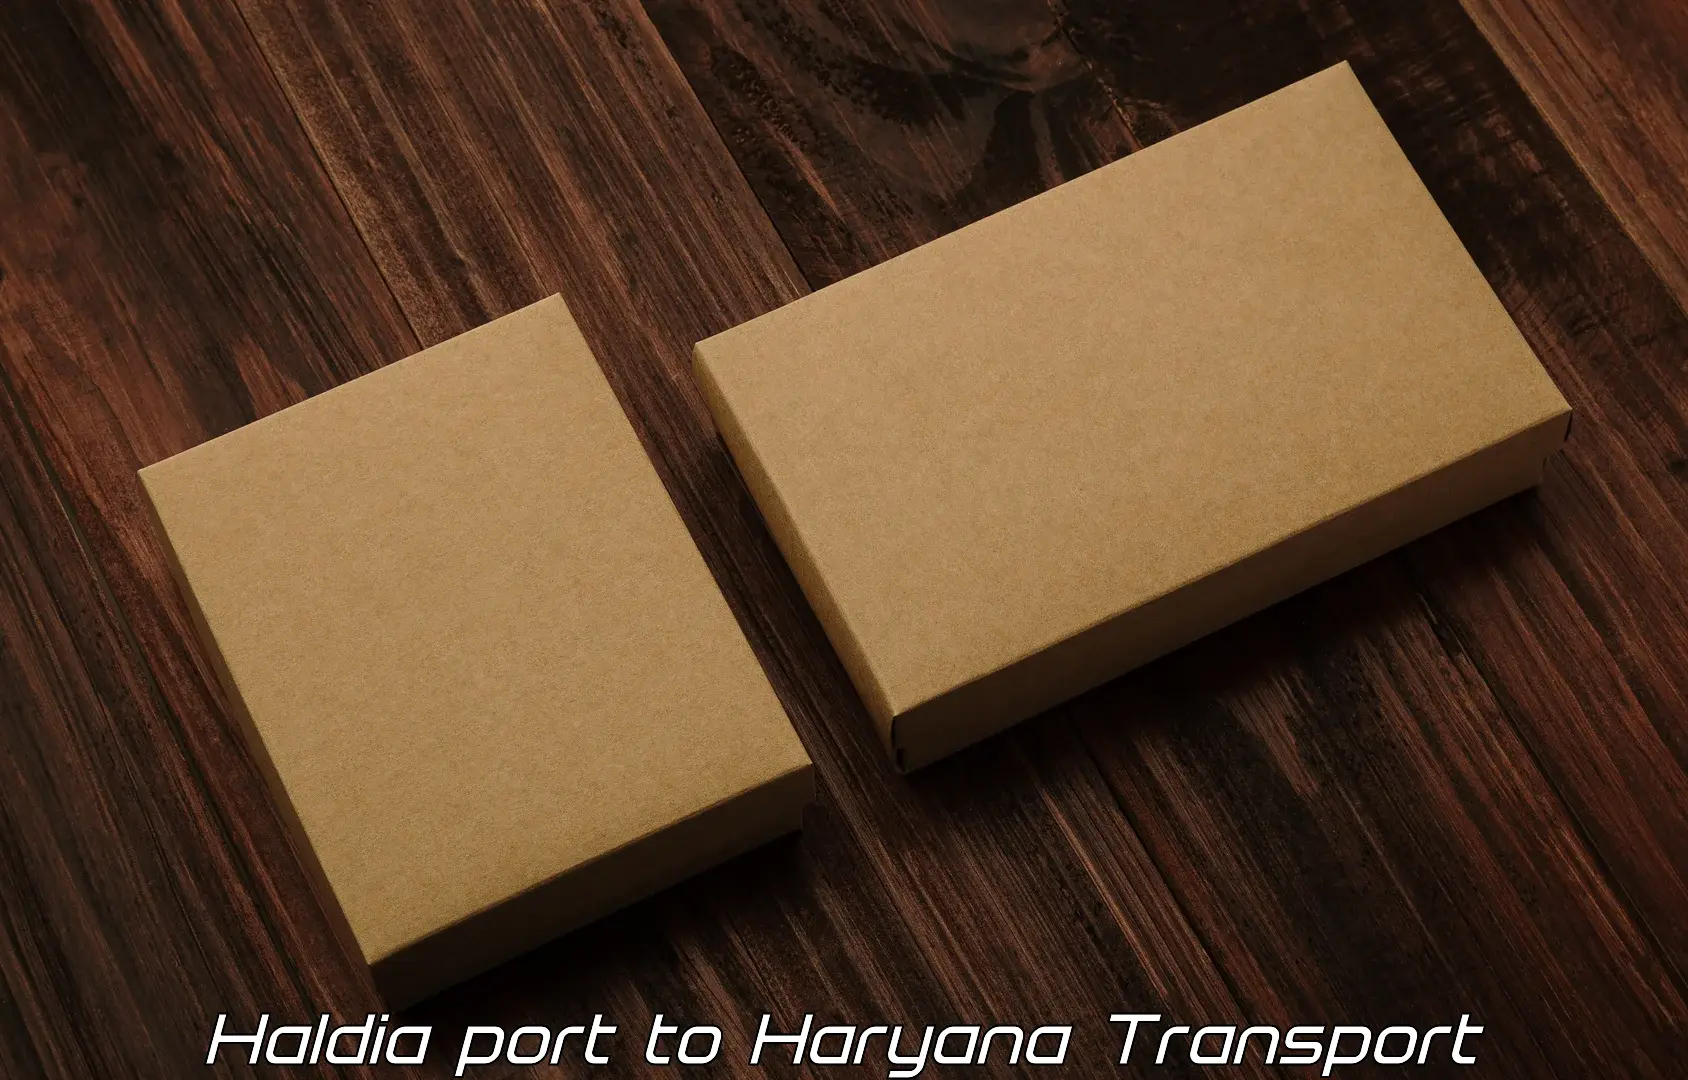 Transport bike from one state to another Haldia port to Siwani